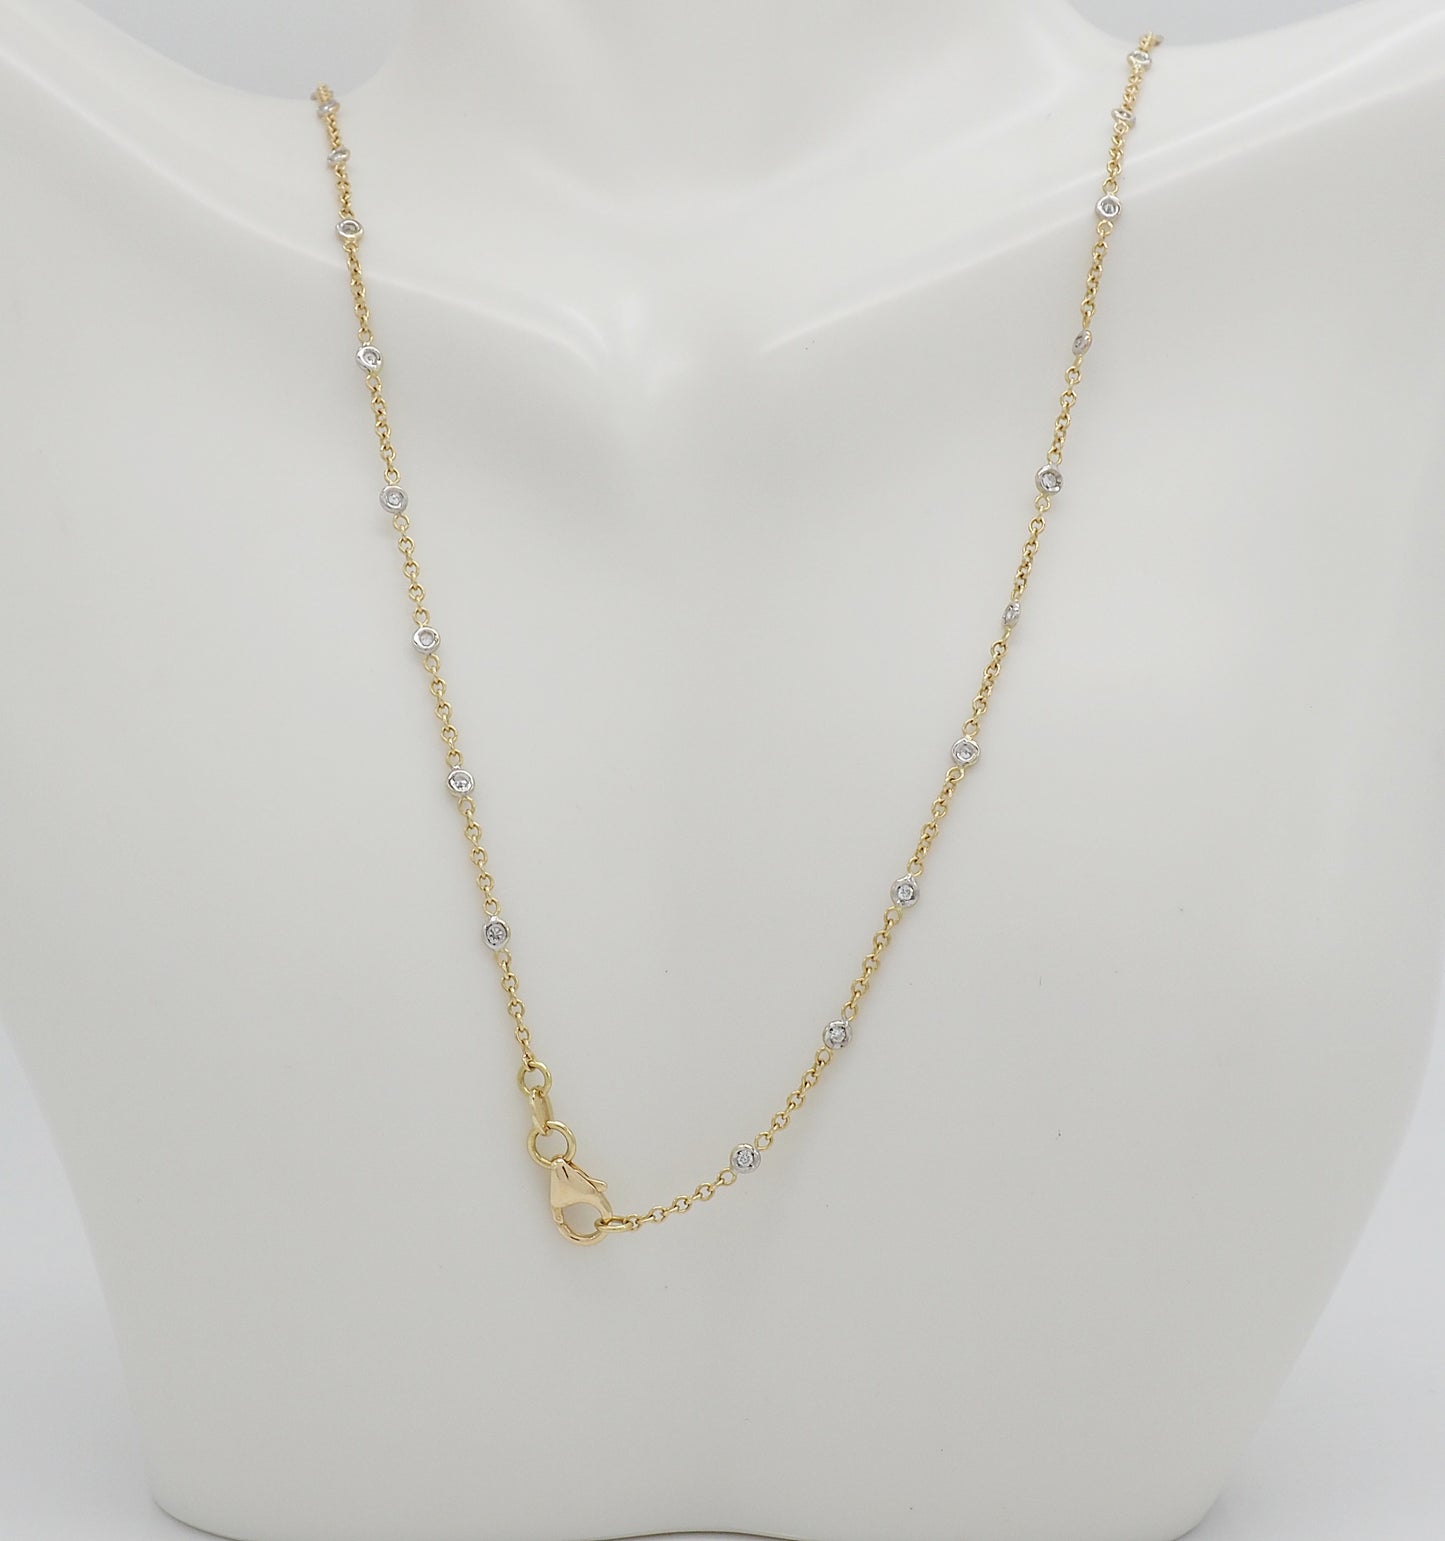 18k Yellow Gold Diamond Chain Necklace, 17.75 inches - 3.7g